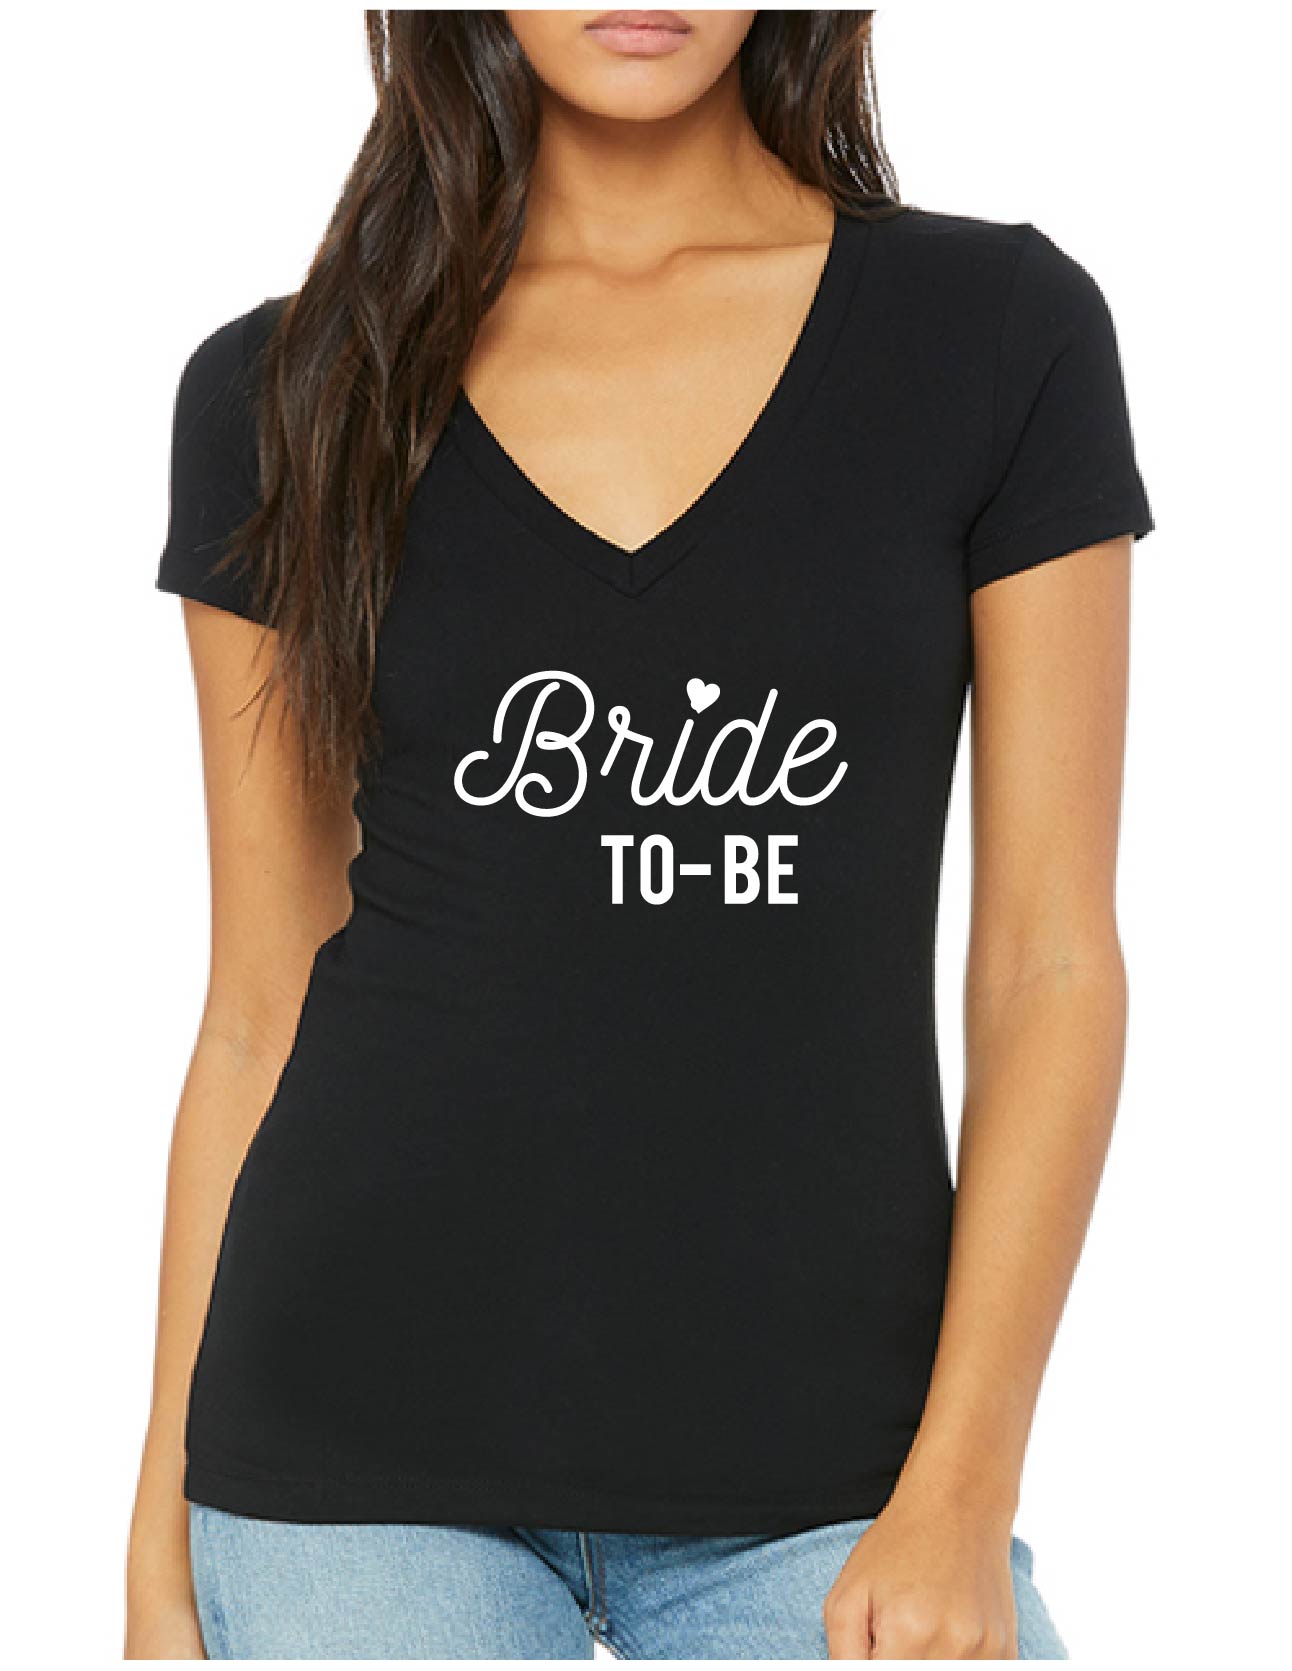 Bride-To-Be Tee (272)